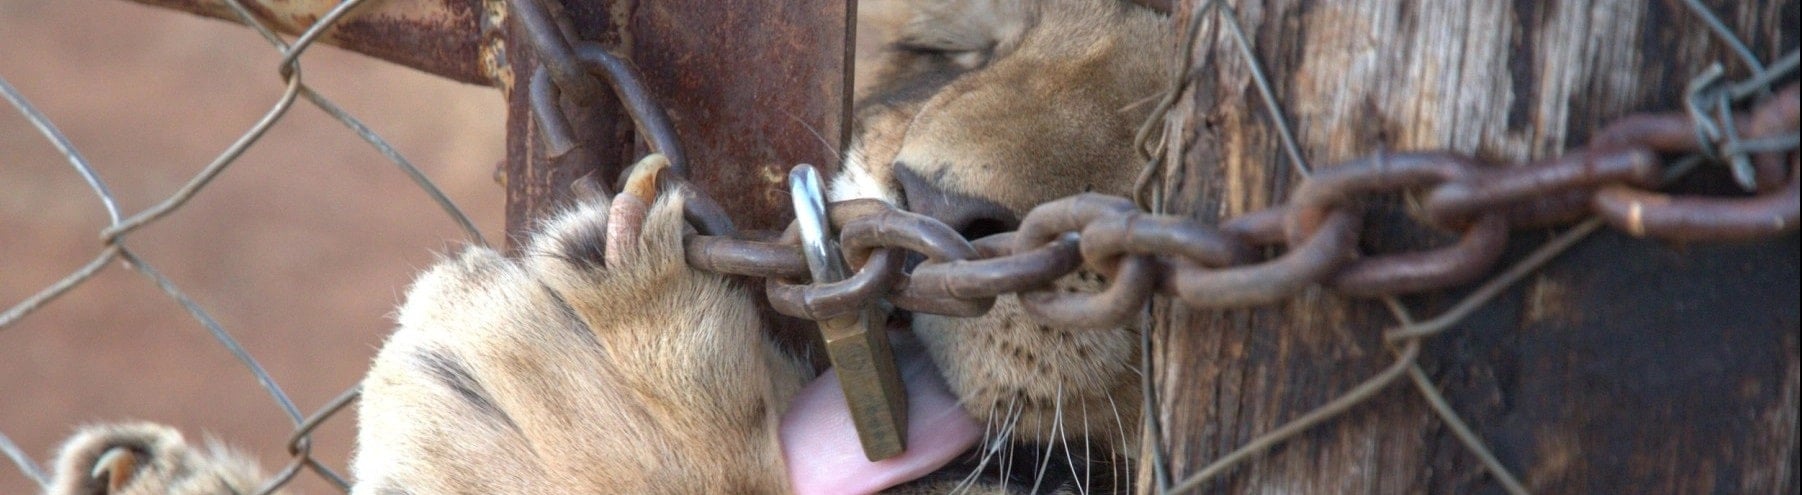 Captive lion in South Africa